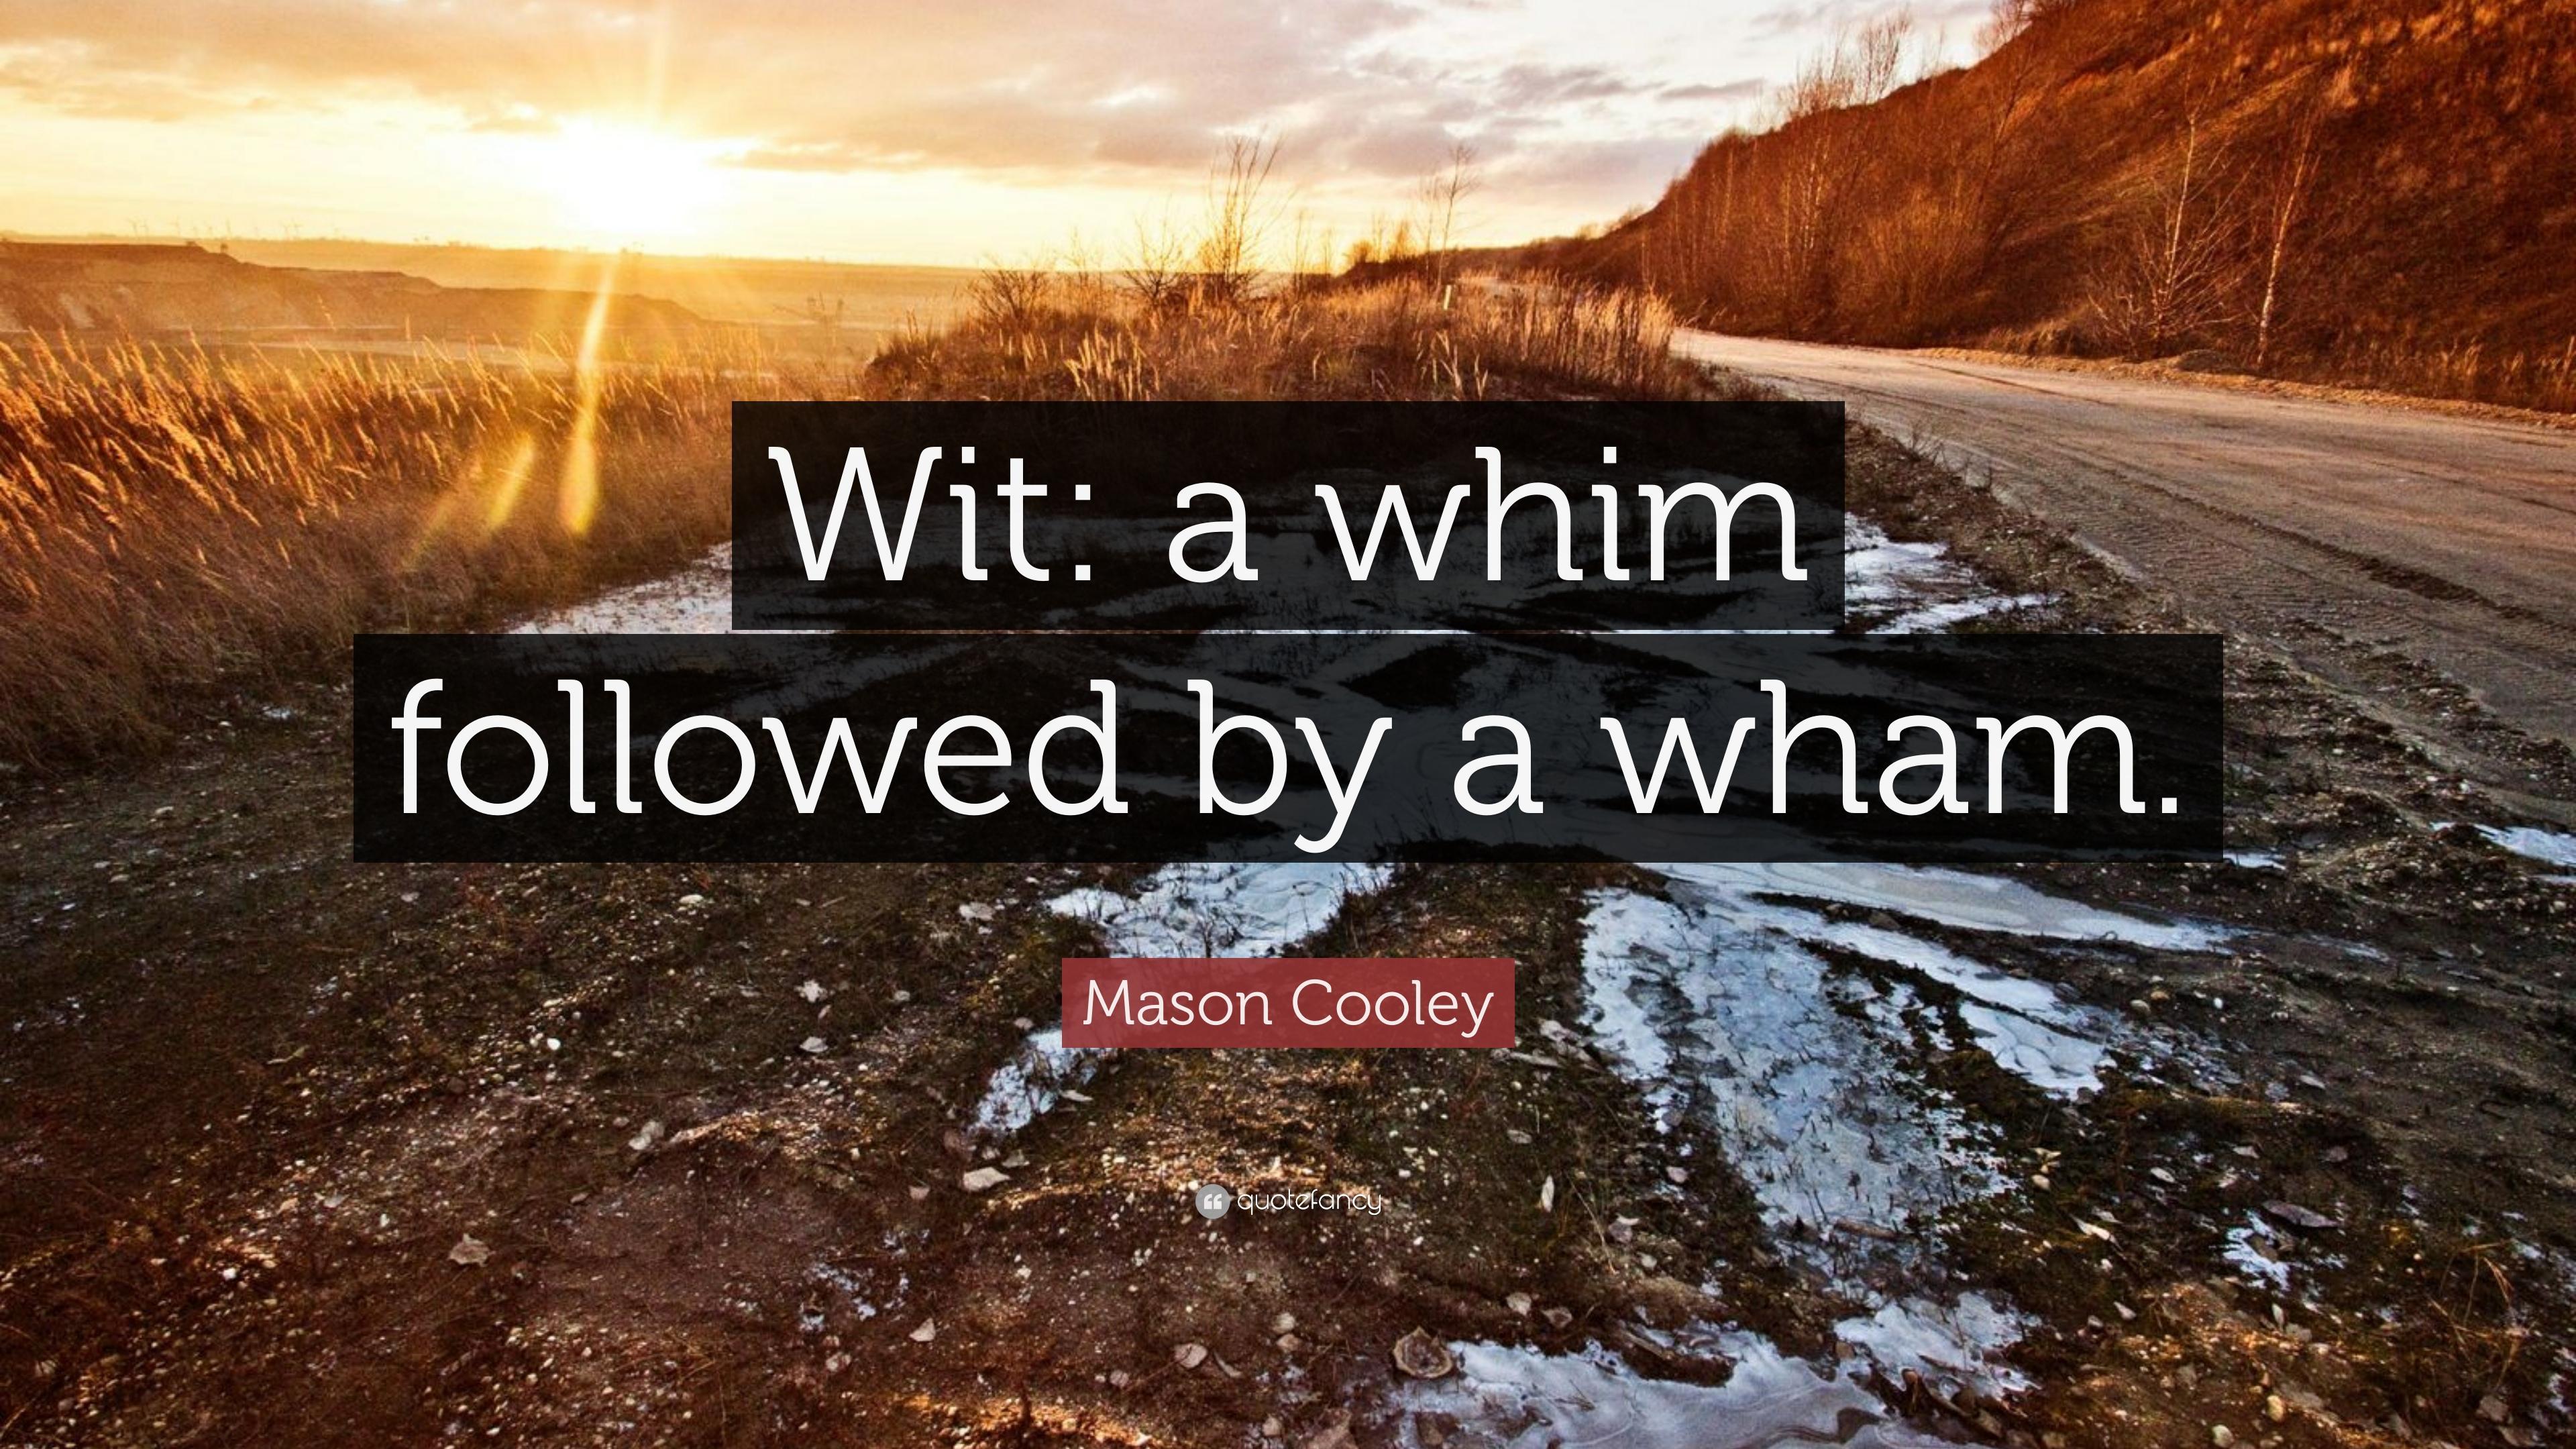 Mason Cooley Quote: “Wit: a whim followed by a wham.” 7 wallpaper